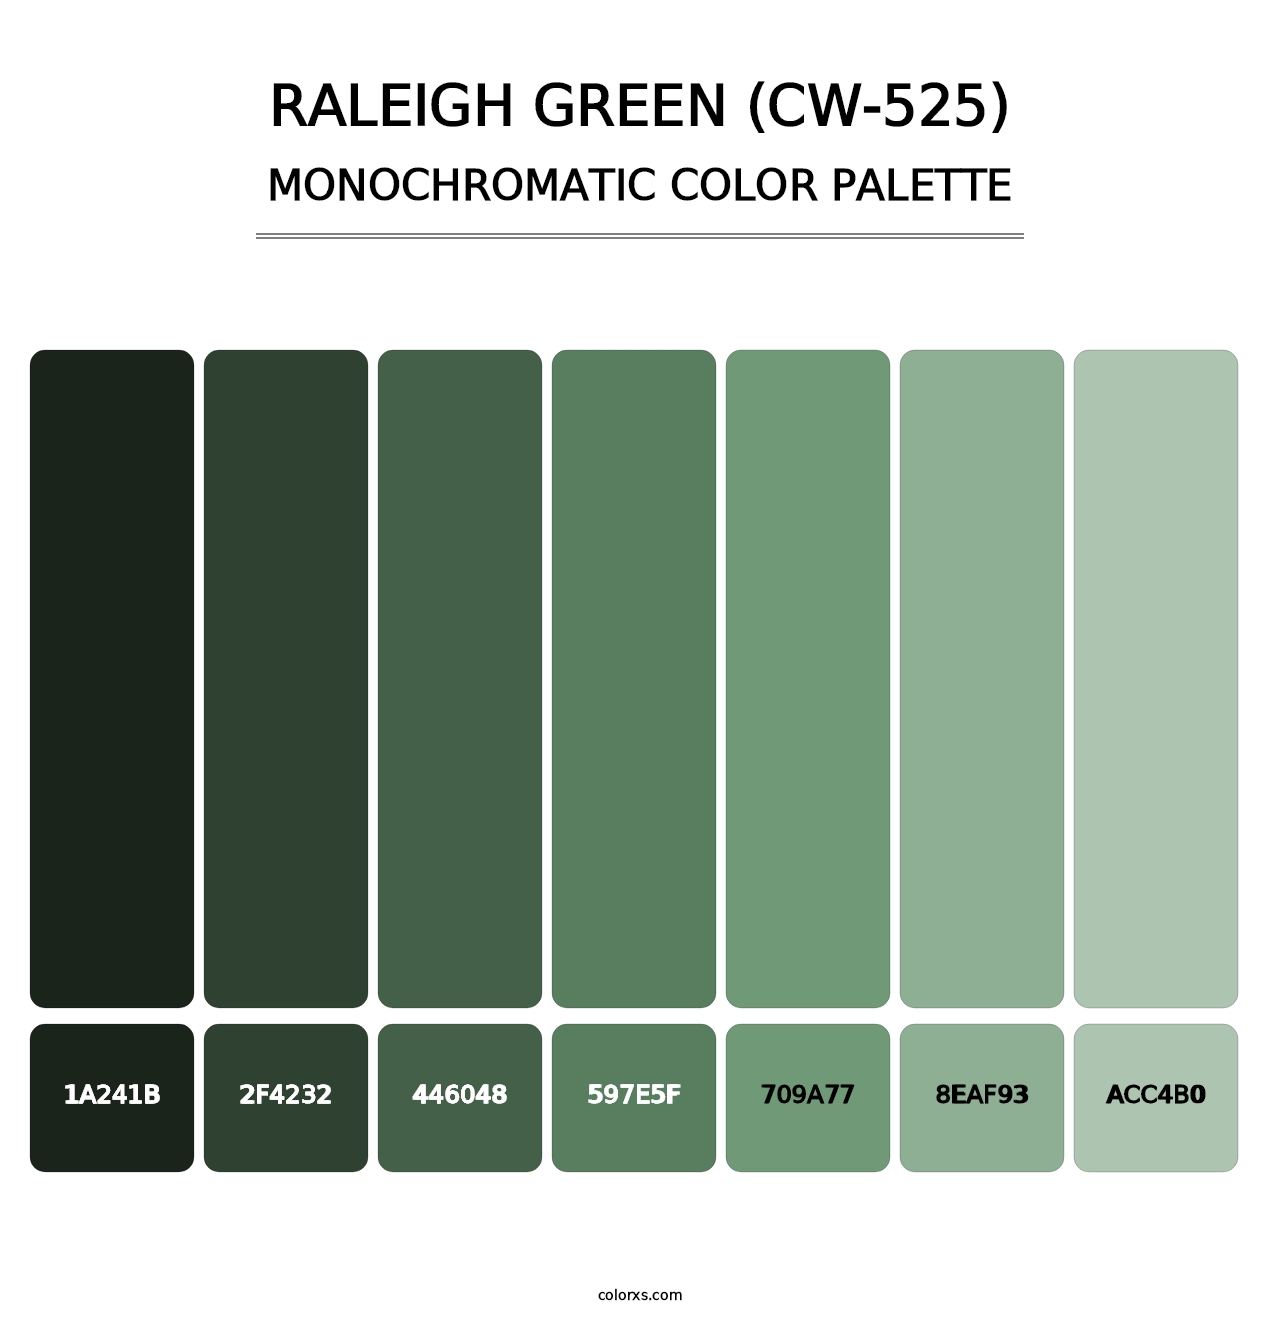 Raleigh Green (CW-525) - Monochromatic Color Palette